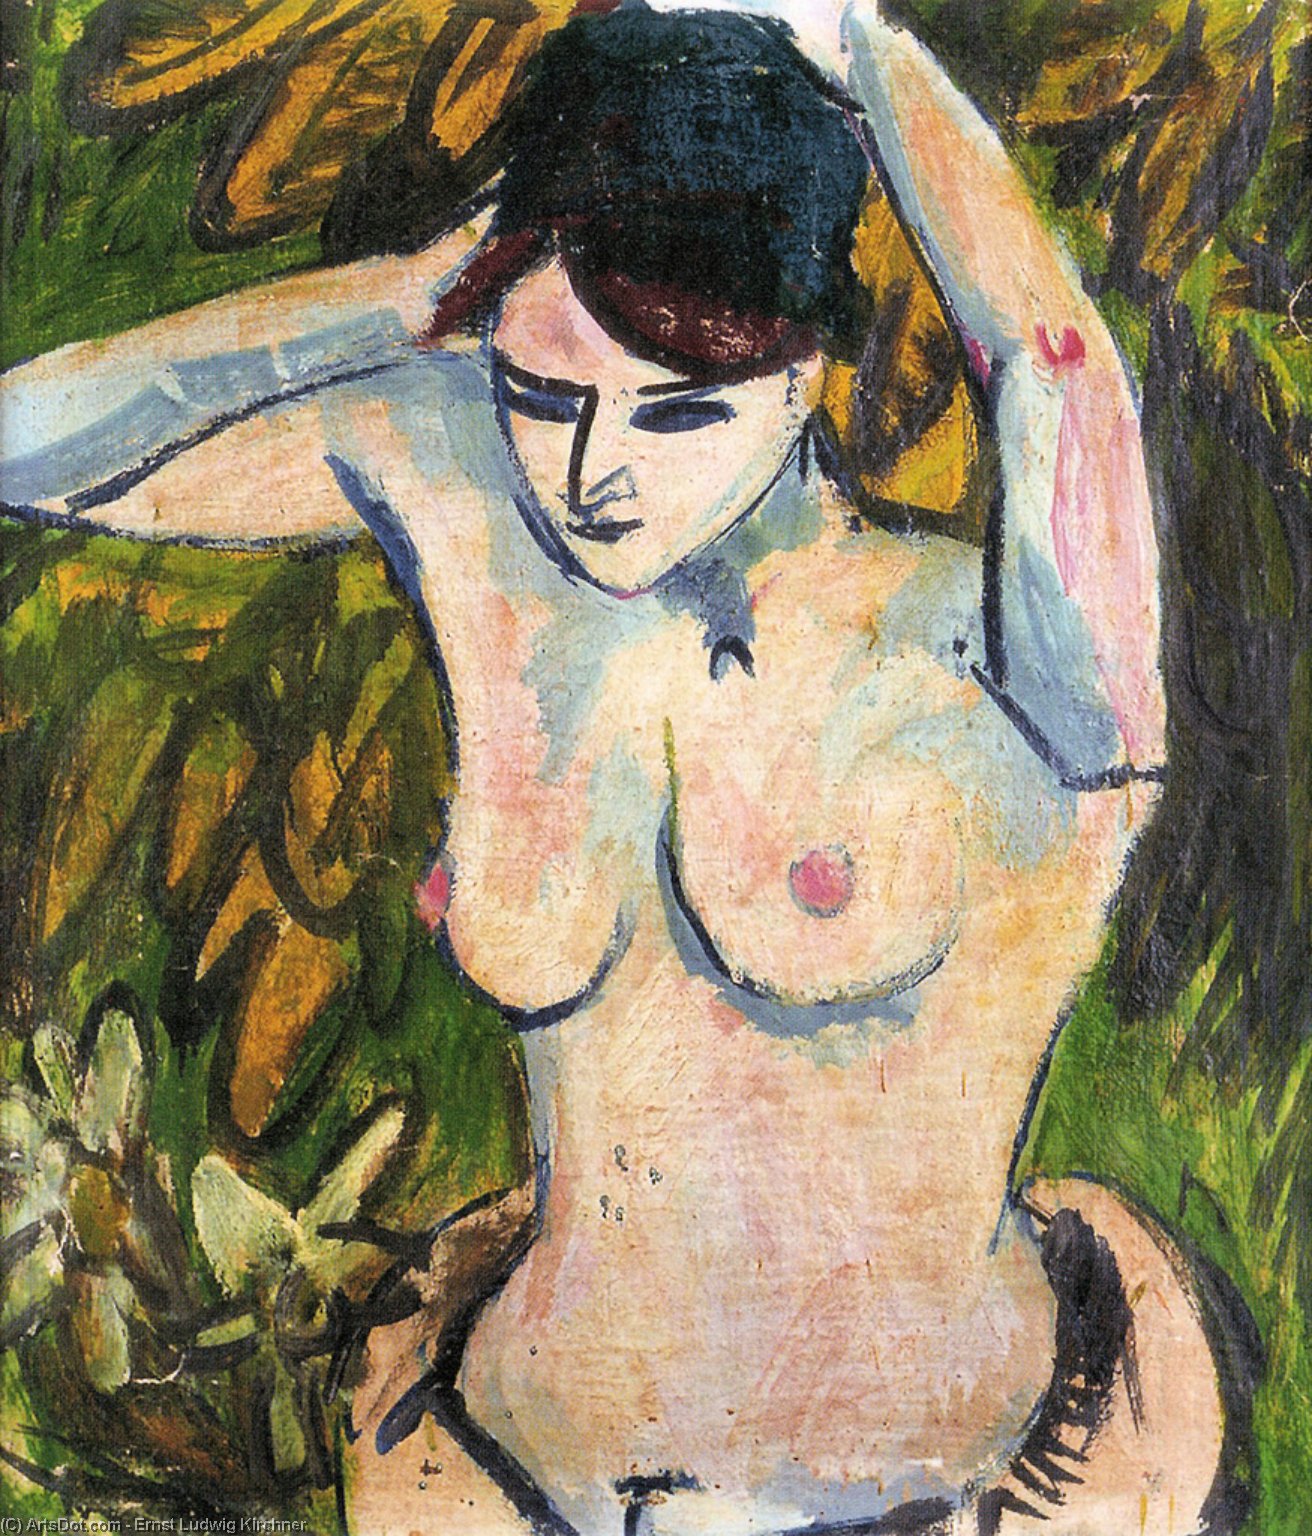 Buy Museum Art Reproductions Half naked figure with arms raised by Ernst Ludwig Kirchner (1880-1938, Germany) | ArtsDot.com